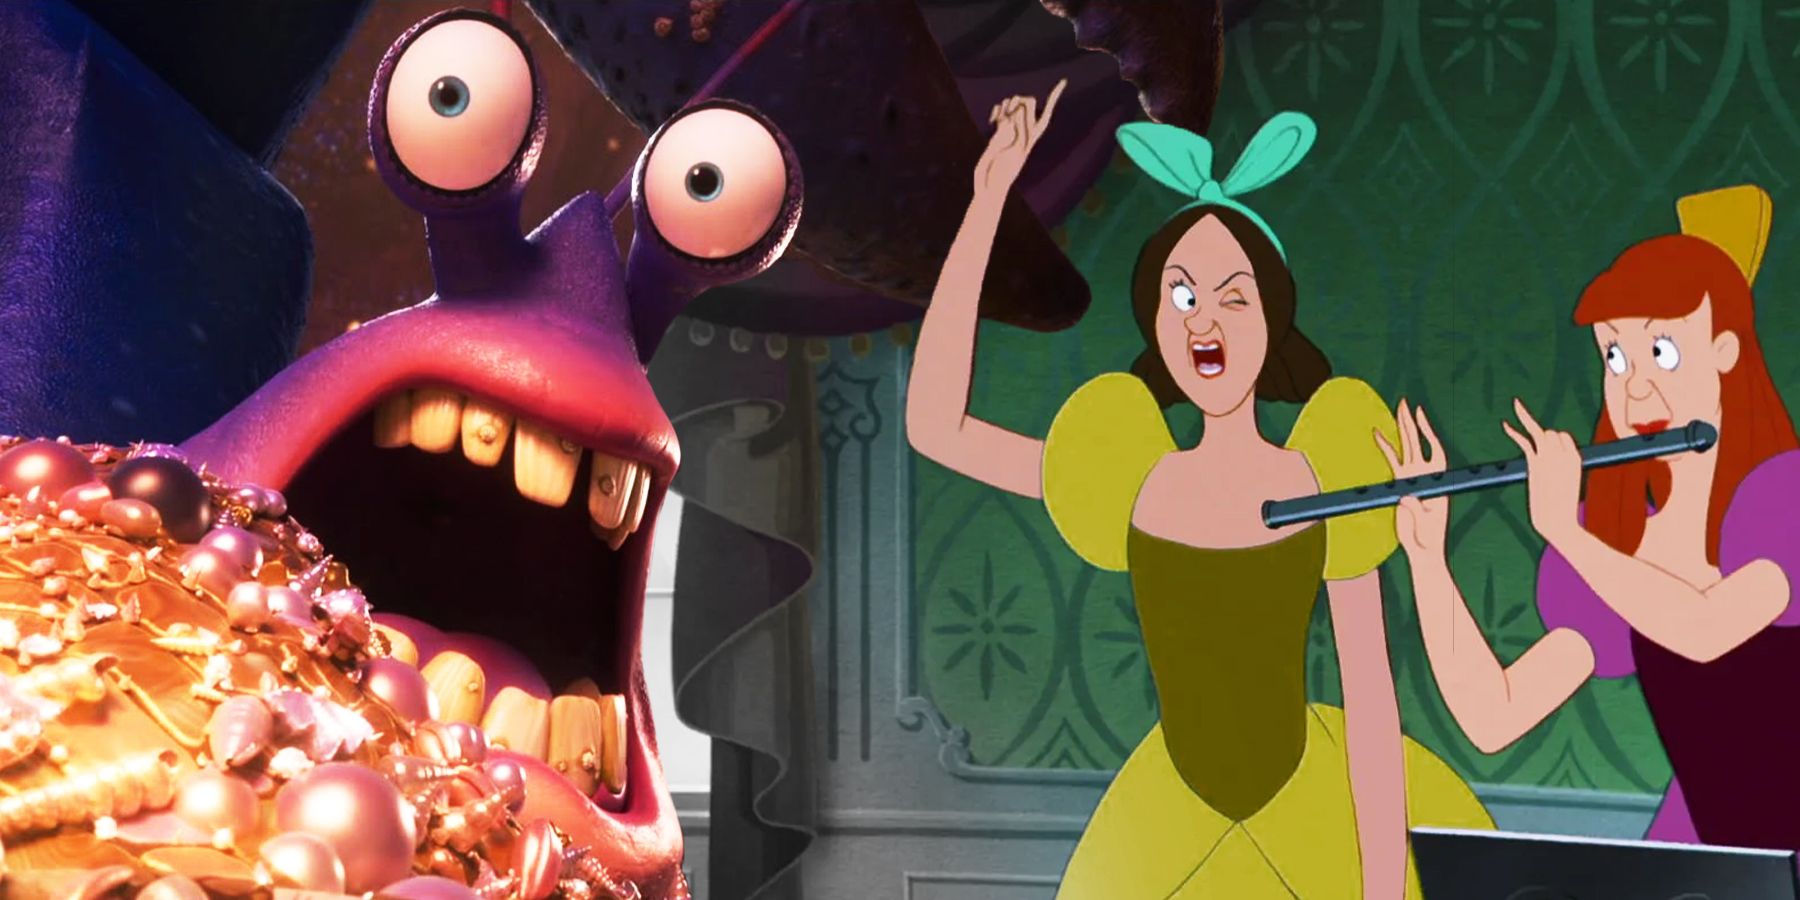 On the left, Tamatoa of 'Moana' looks shocked with mouth agape. On the right, Anastasia and Drizella of 'Cinderalla' practice singing.